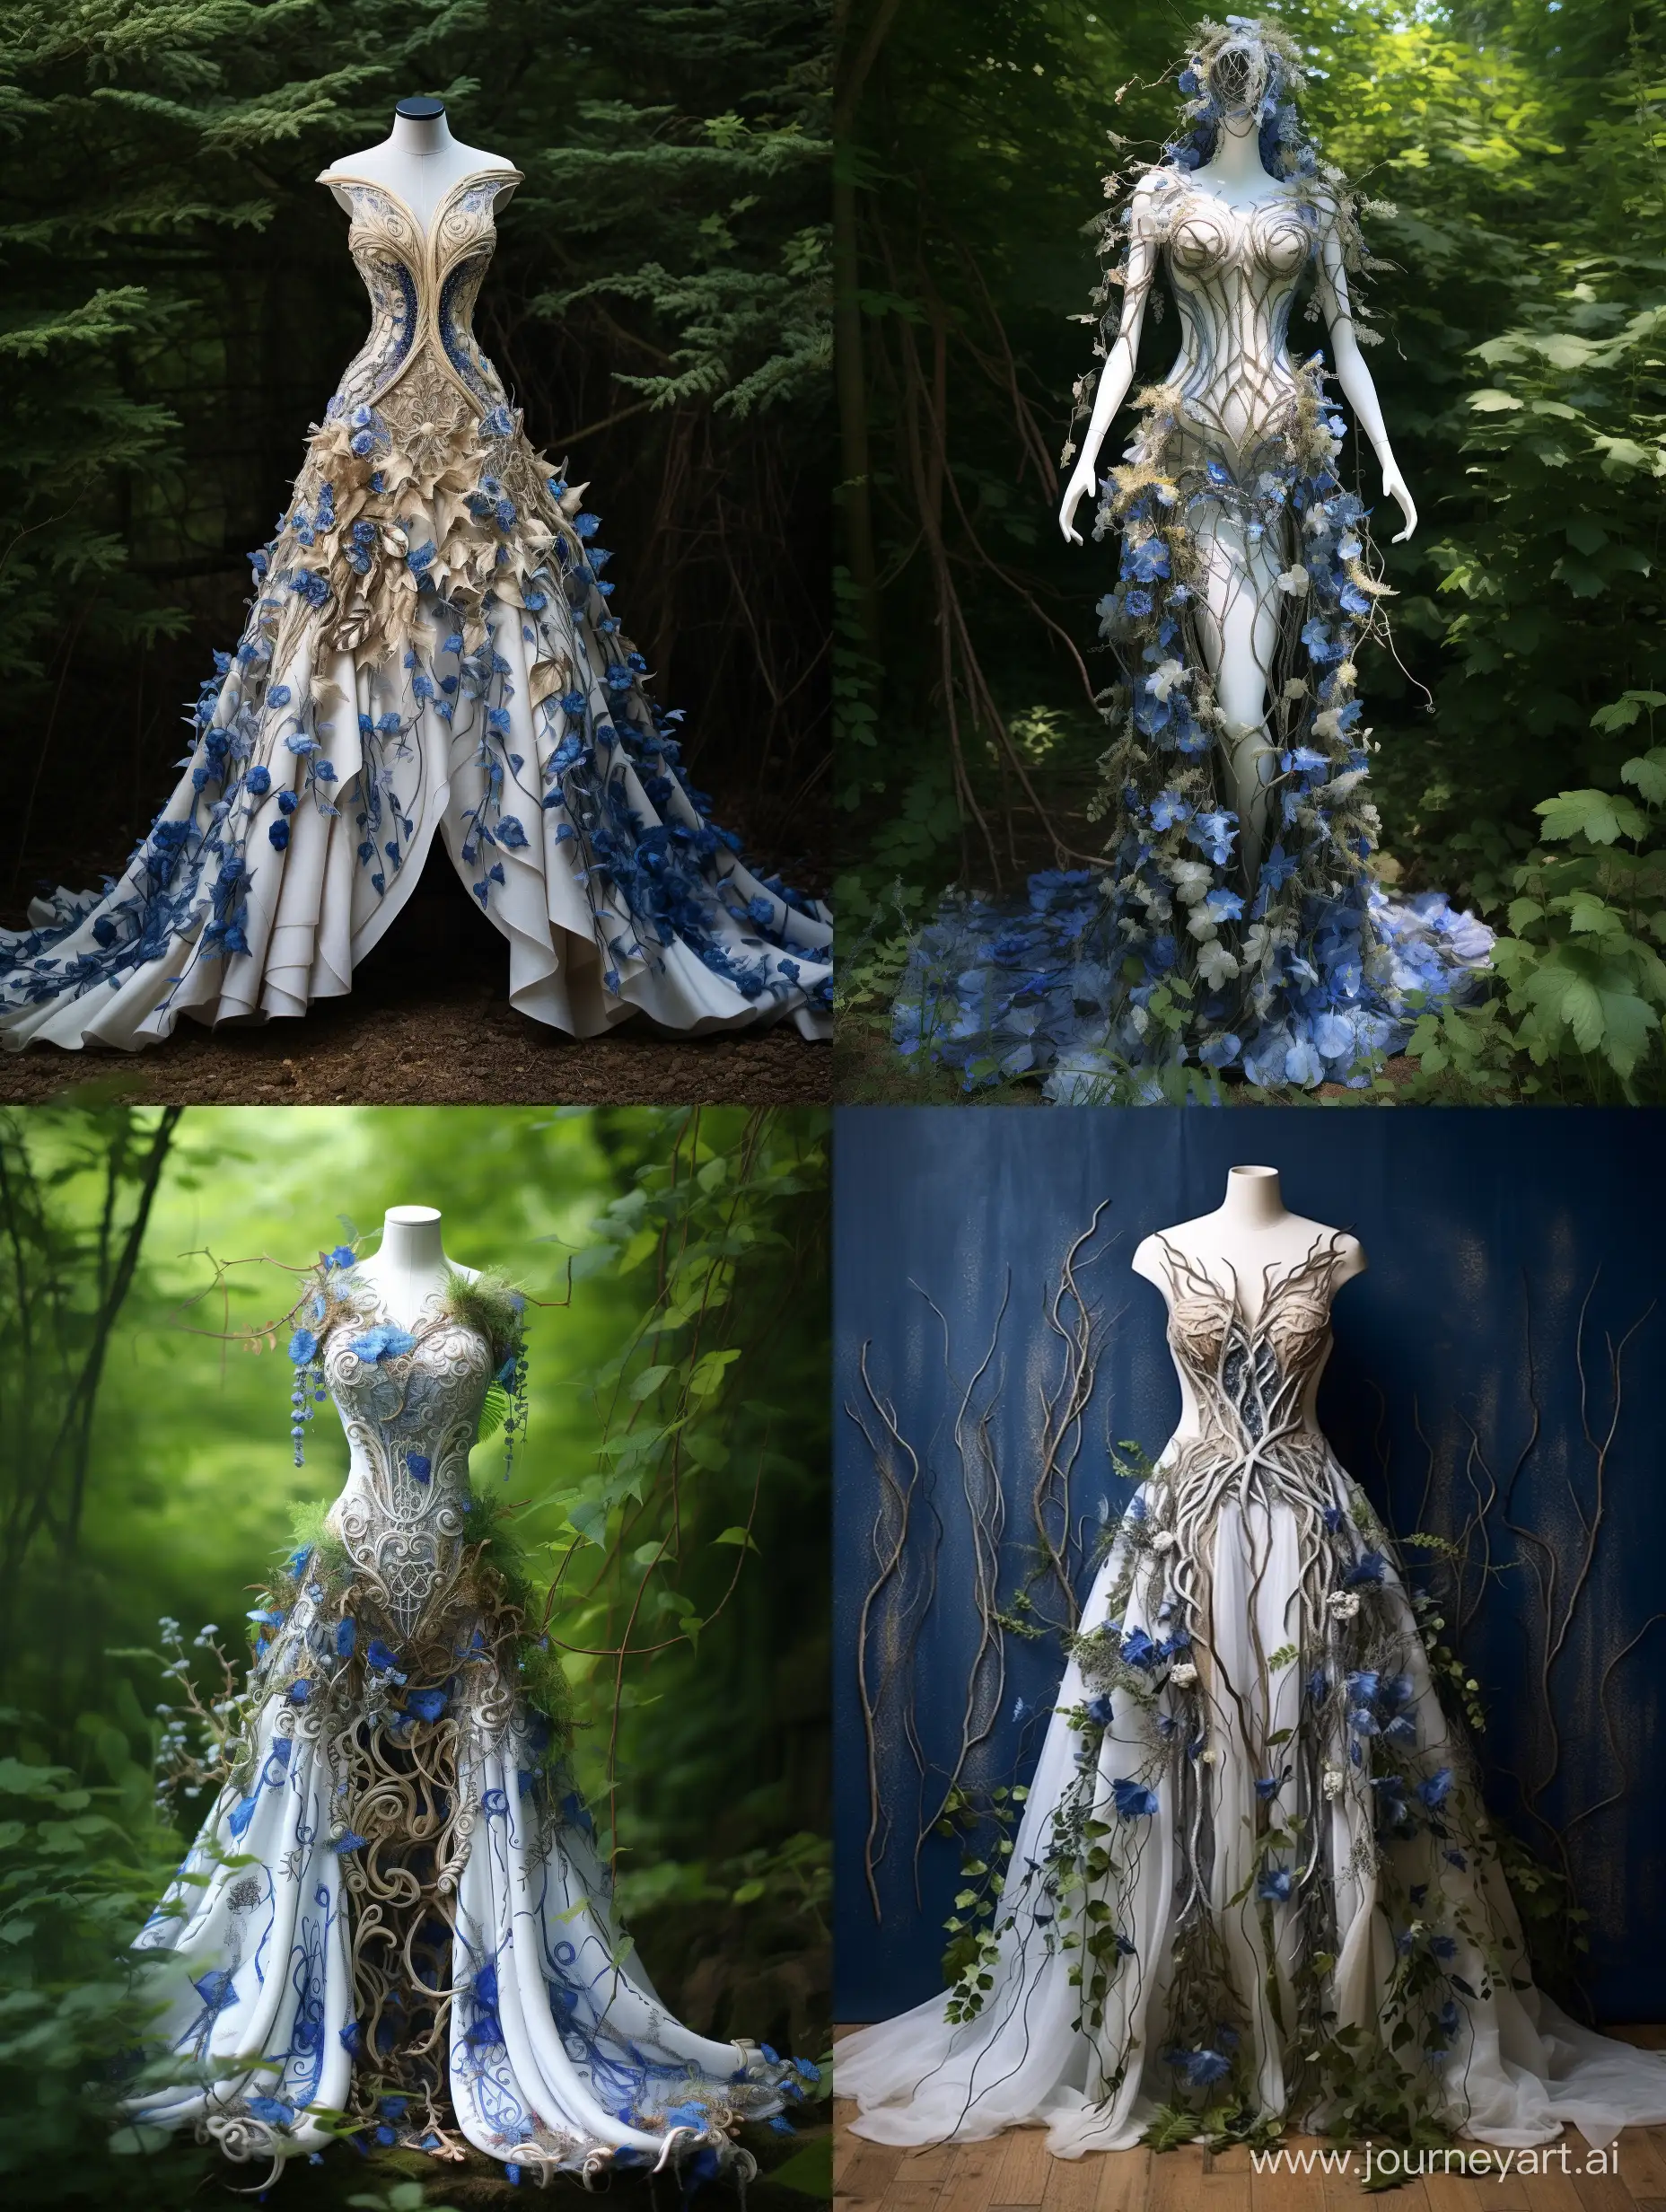 dress made of plants, blue leaves and white wood, fantasy celtic style